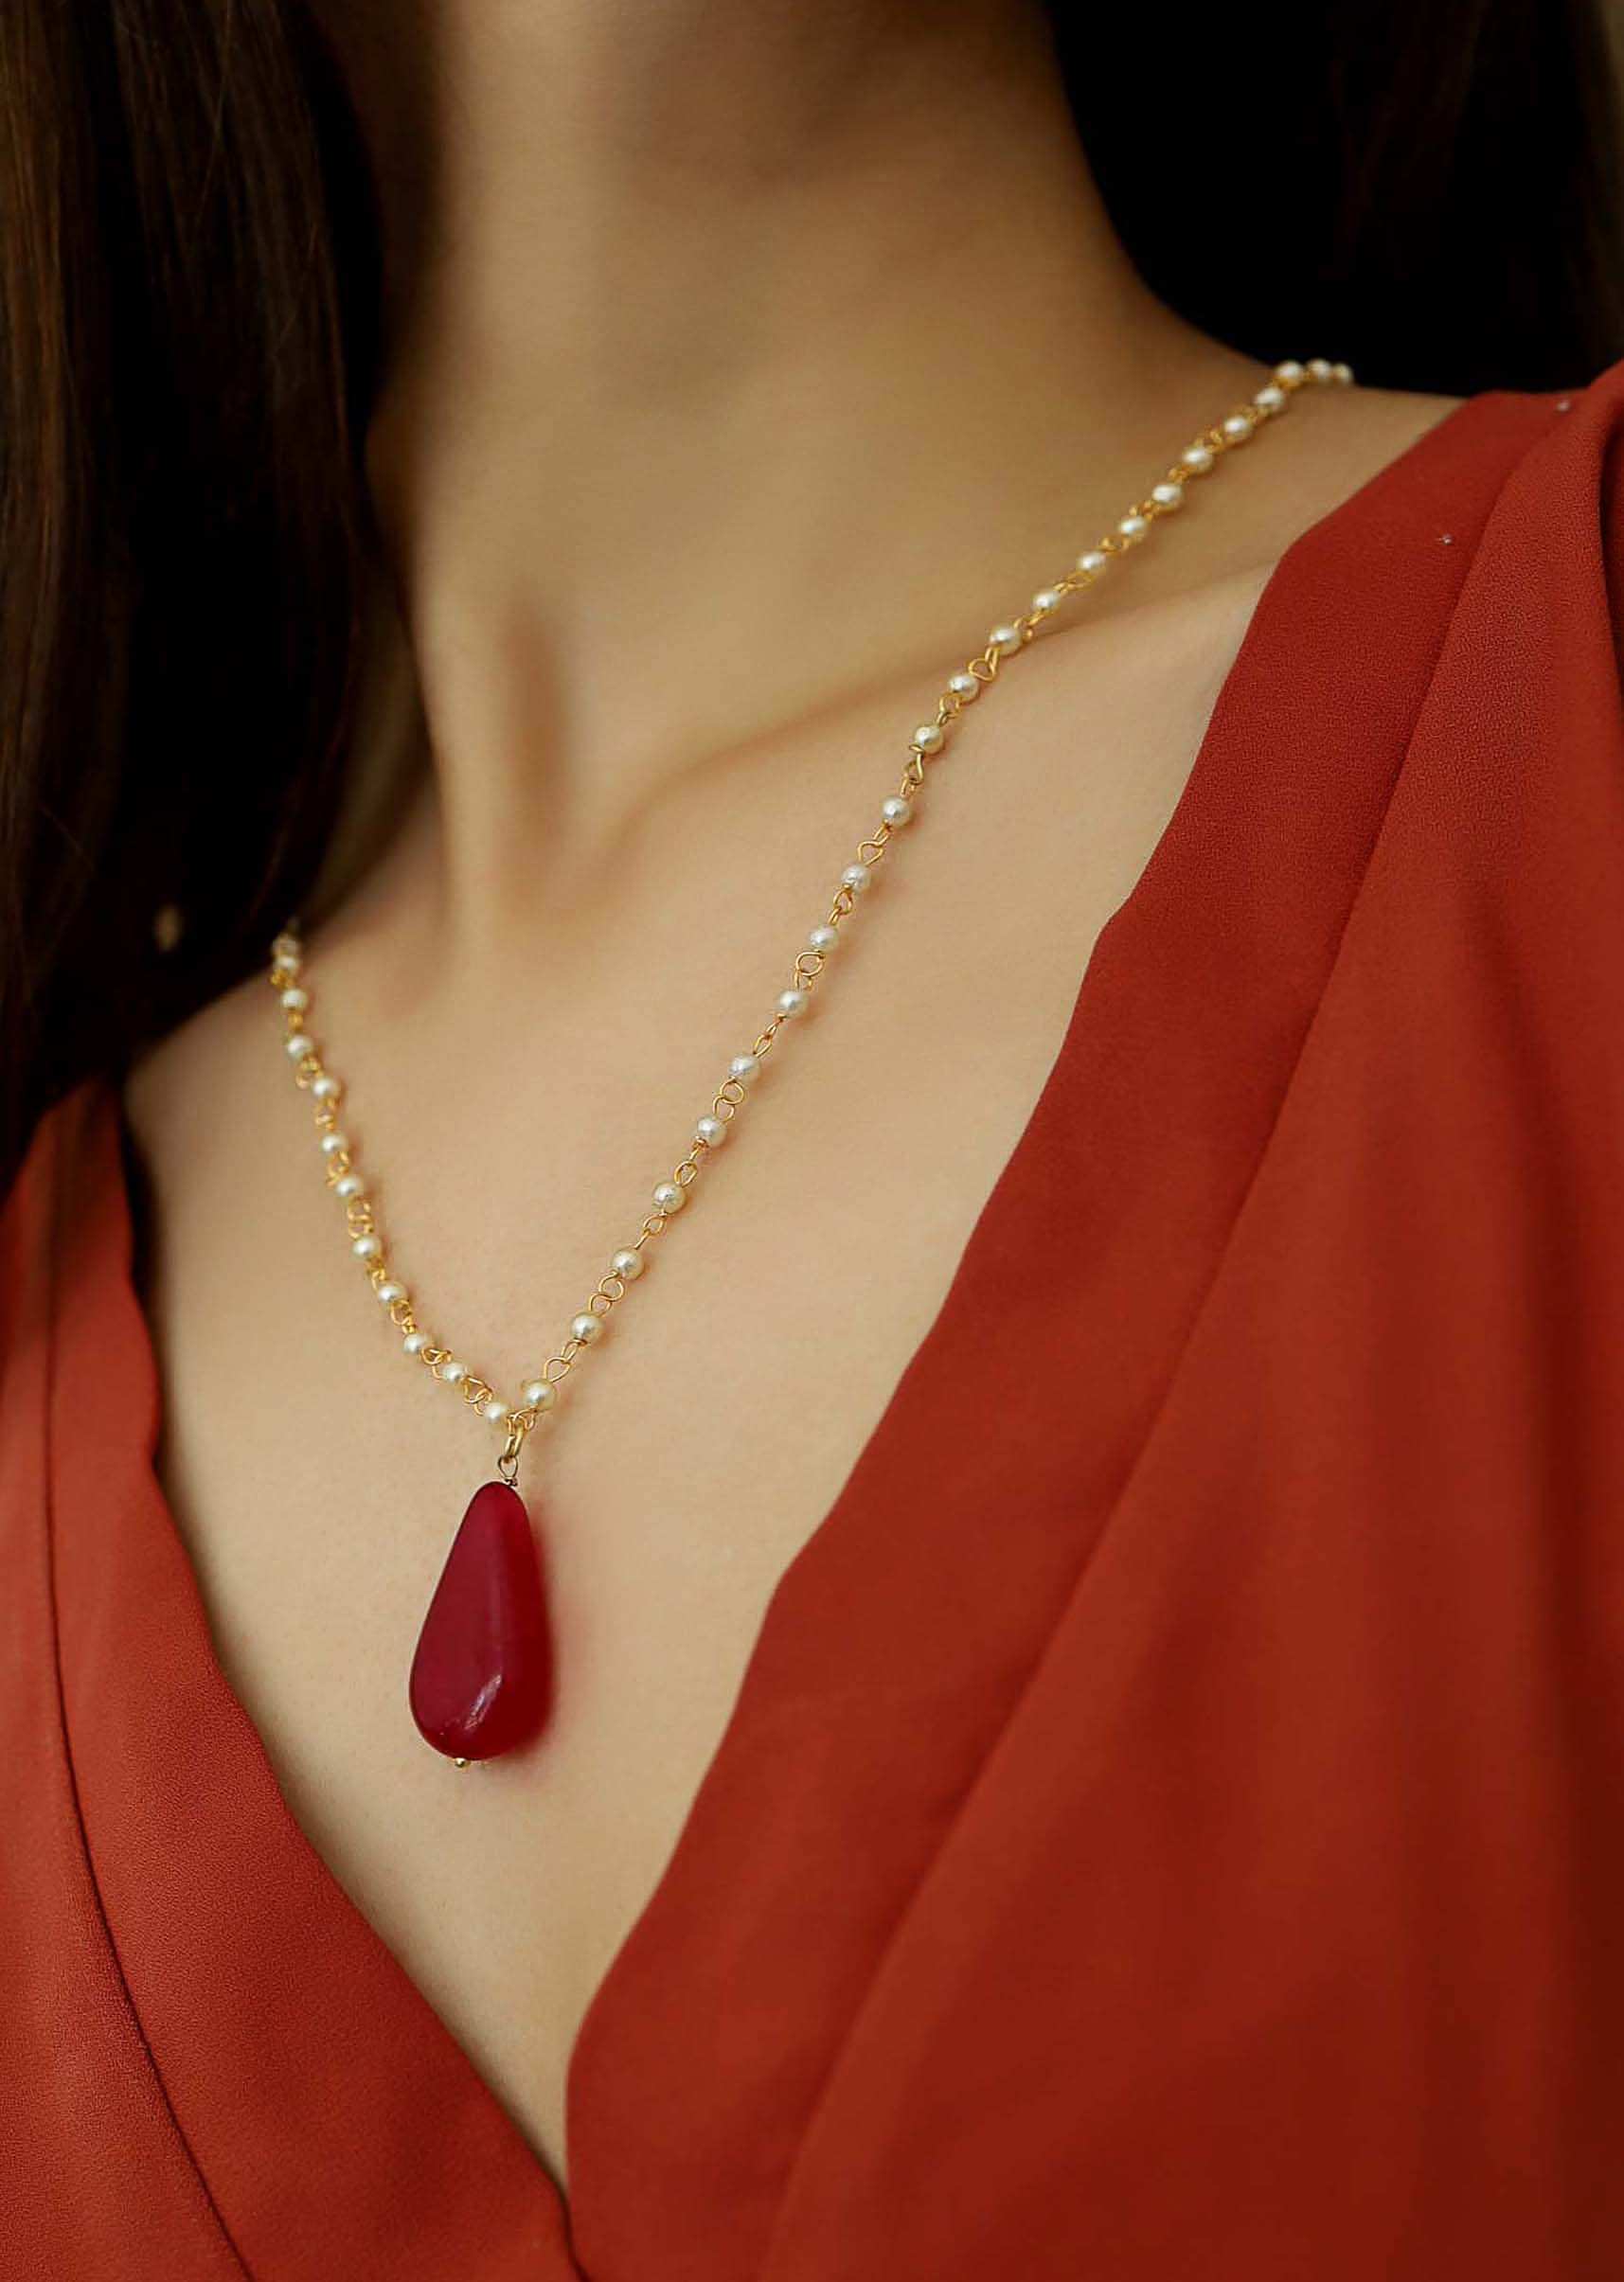 Pearl Necklace With A Red Stone Drop Pendant In The Centre